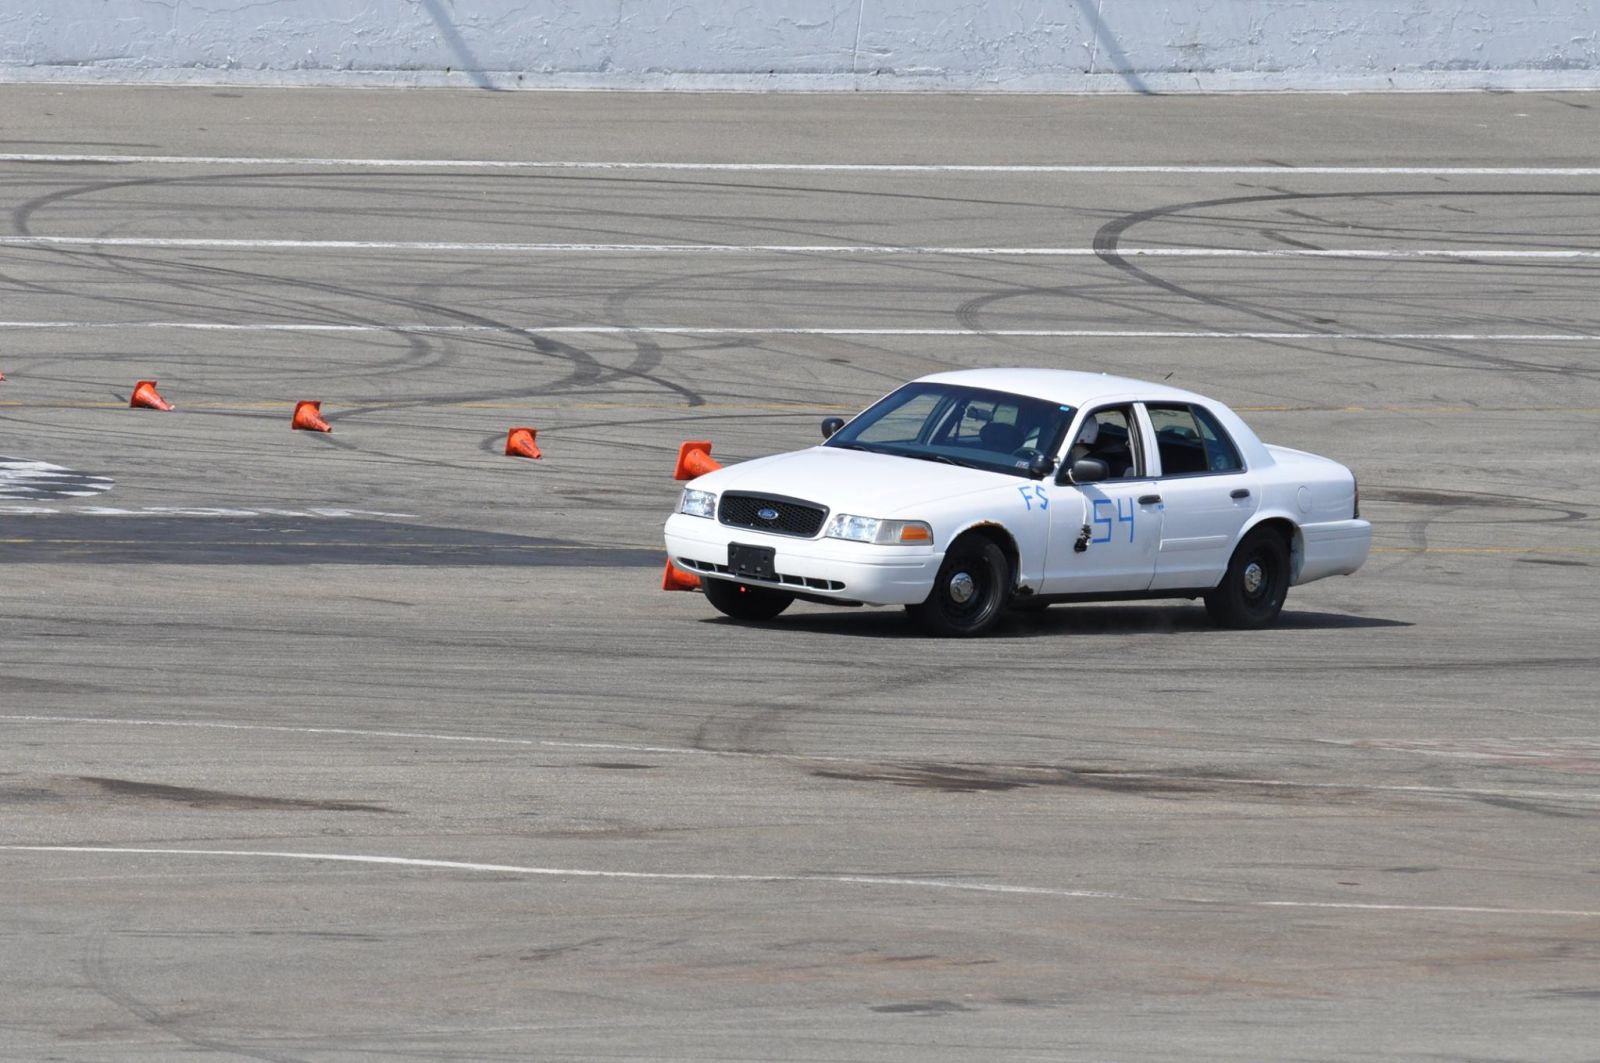 Autocross was not competitive, but a lot of fun